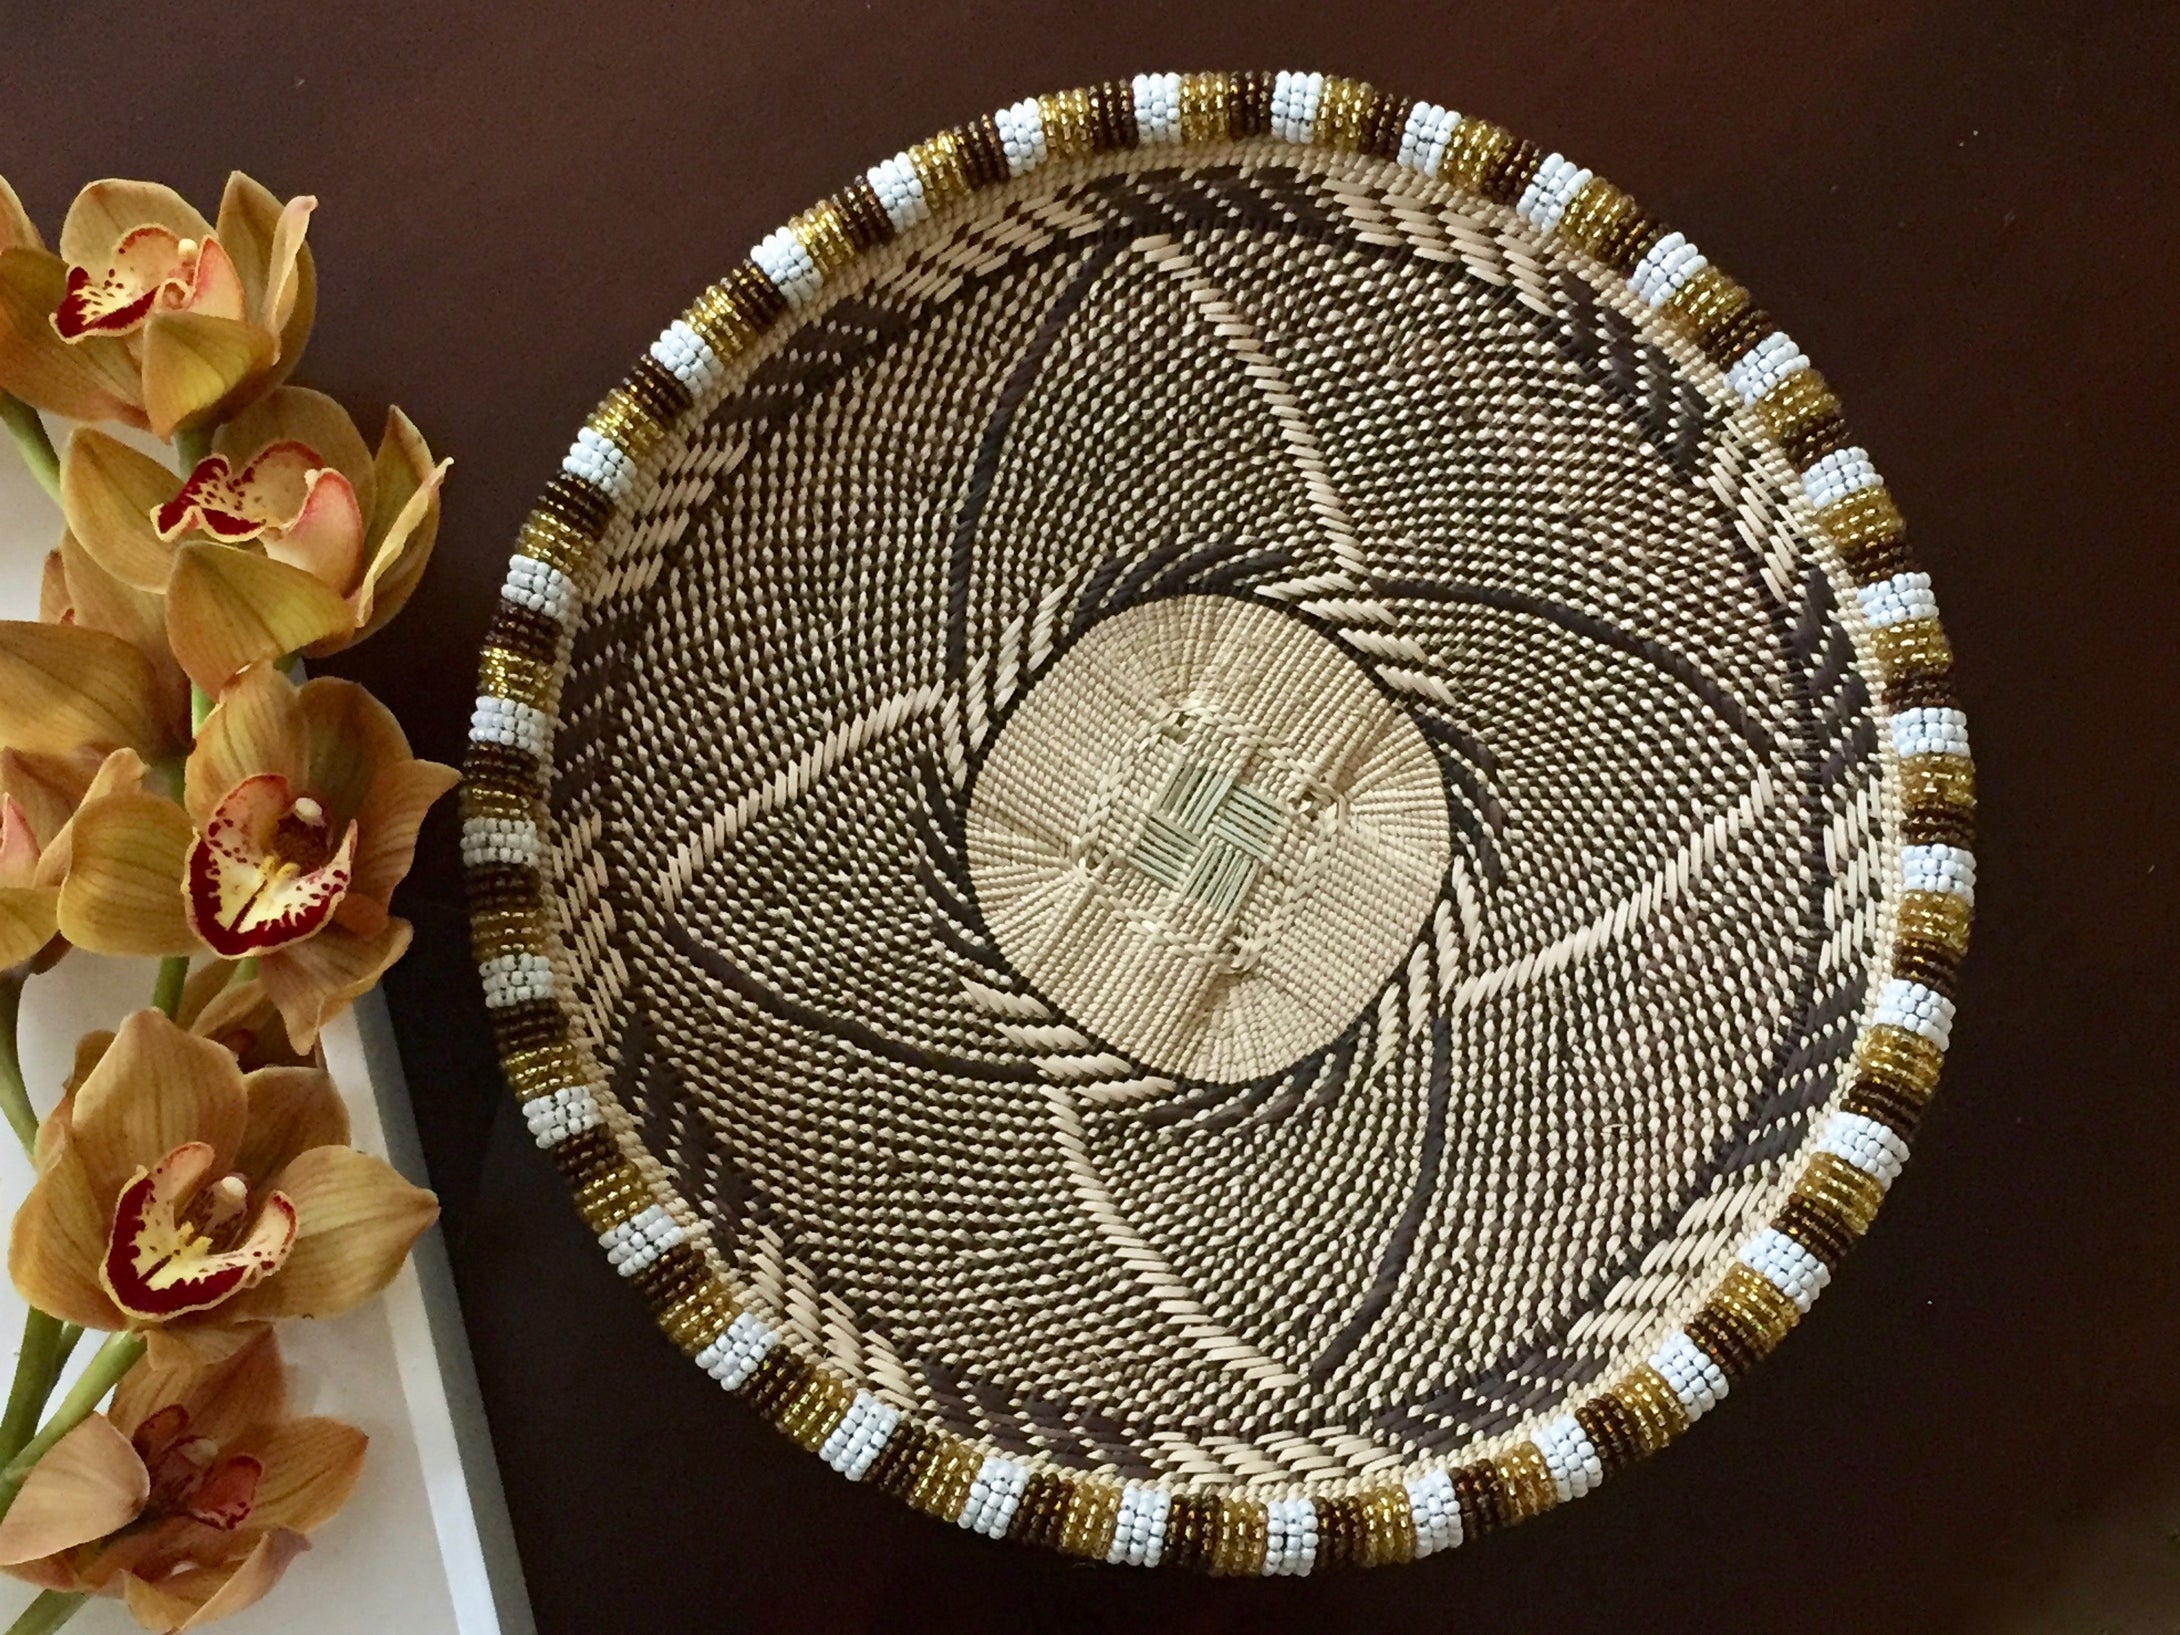 Small gold, white and brown beaded basket